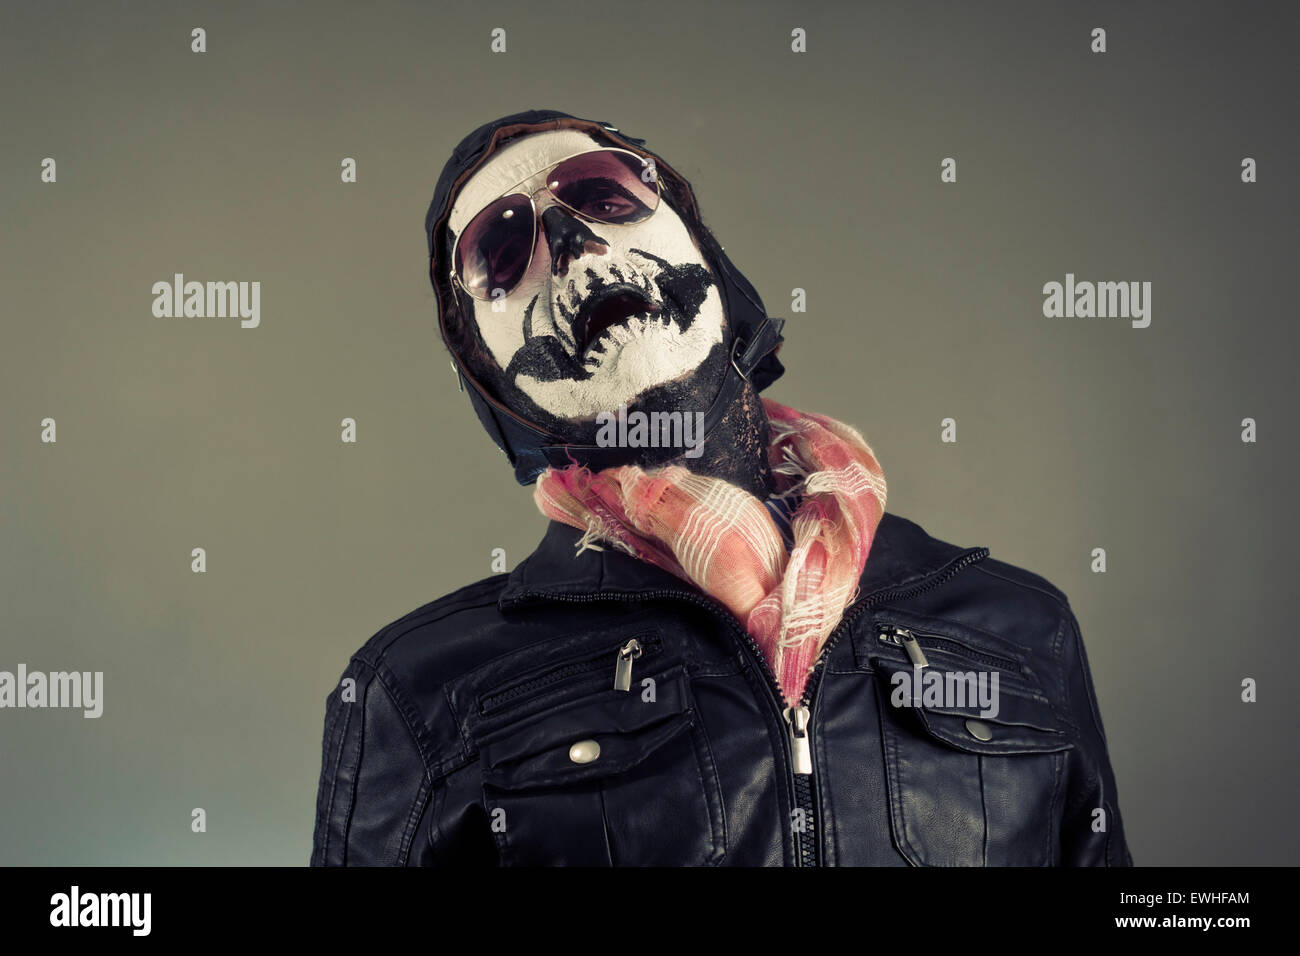 Crying aviator with face painted as human skull Stock Photo